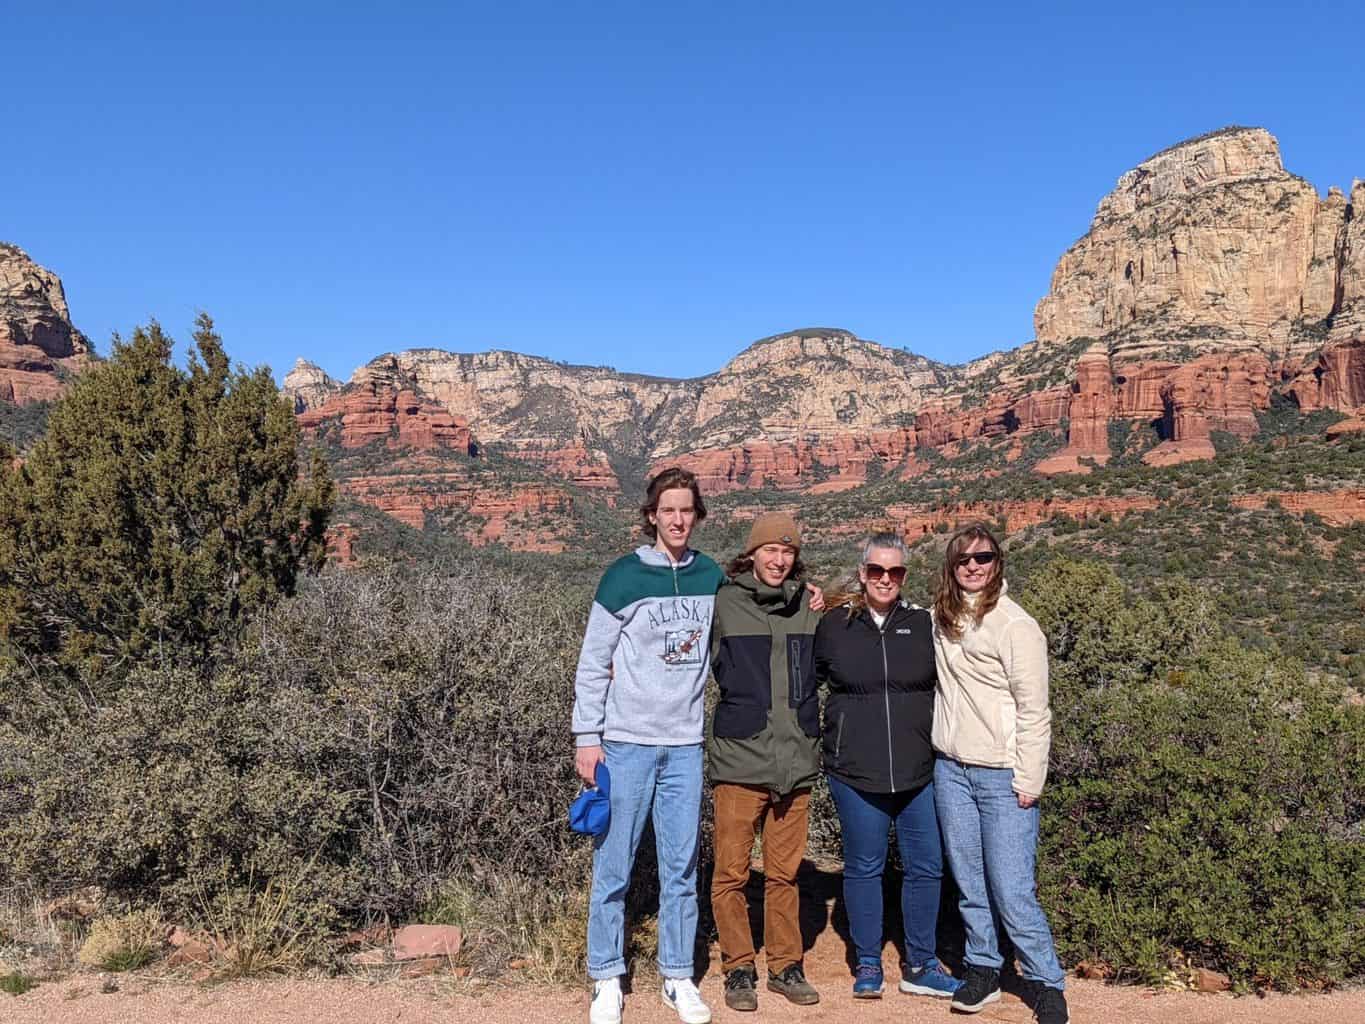 Judy and her family hiking